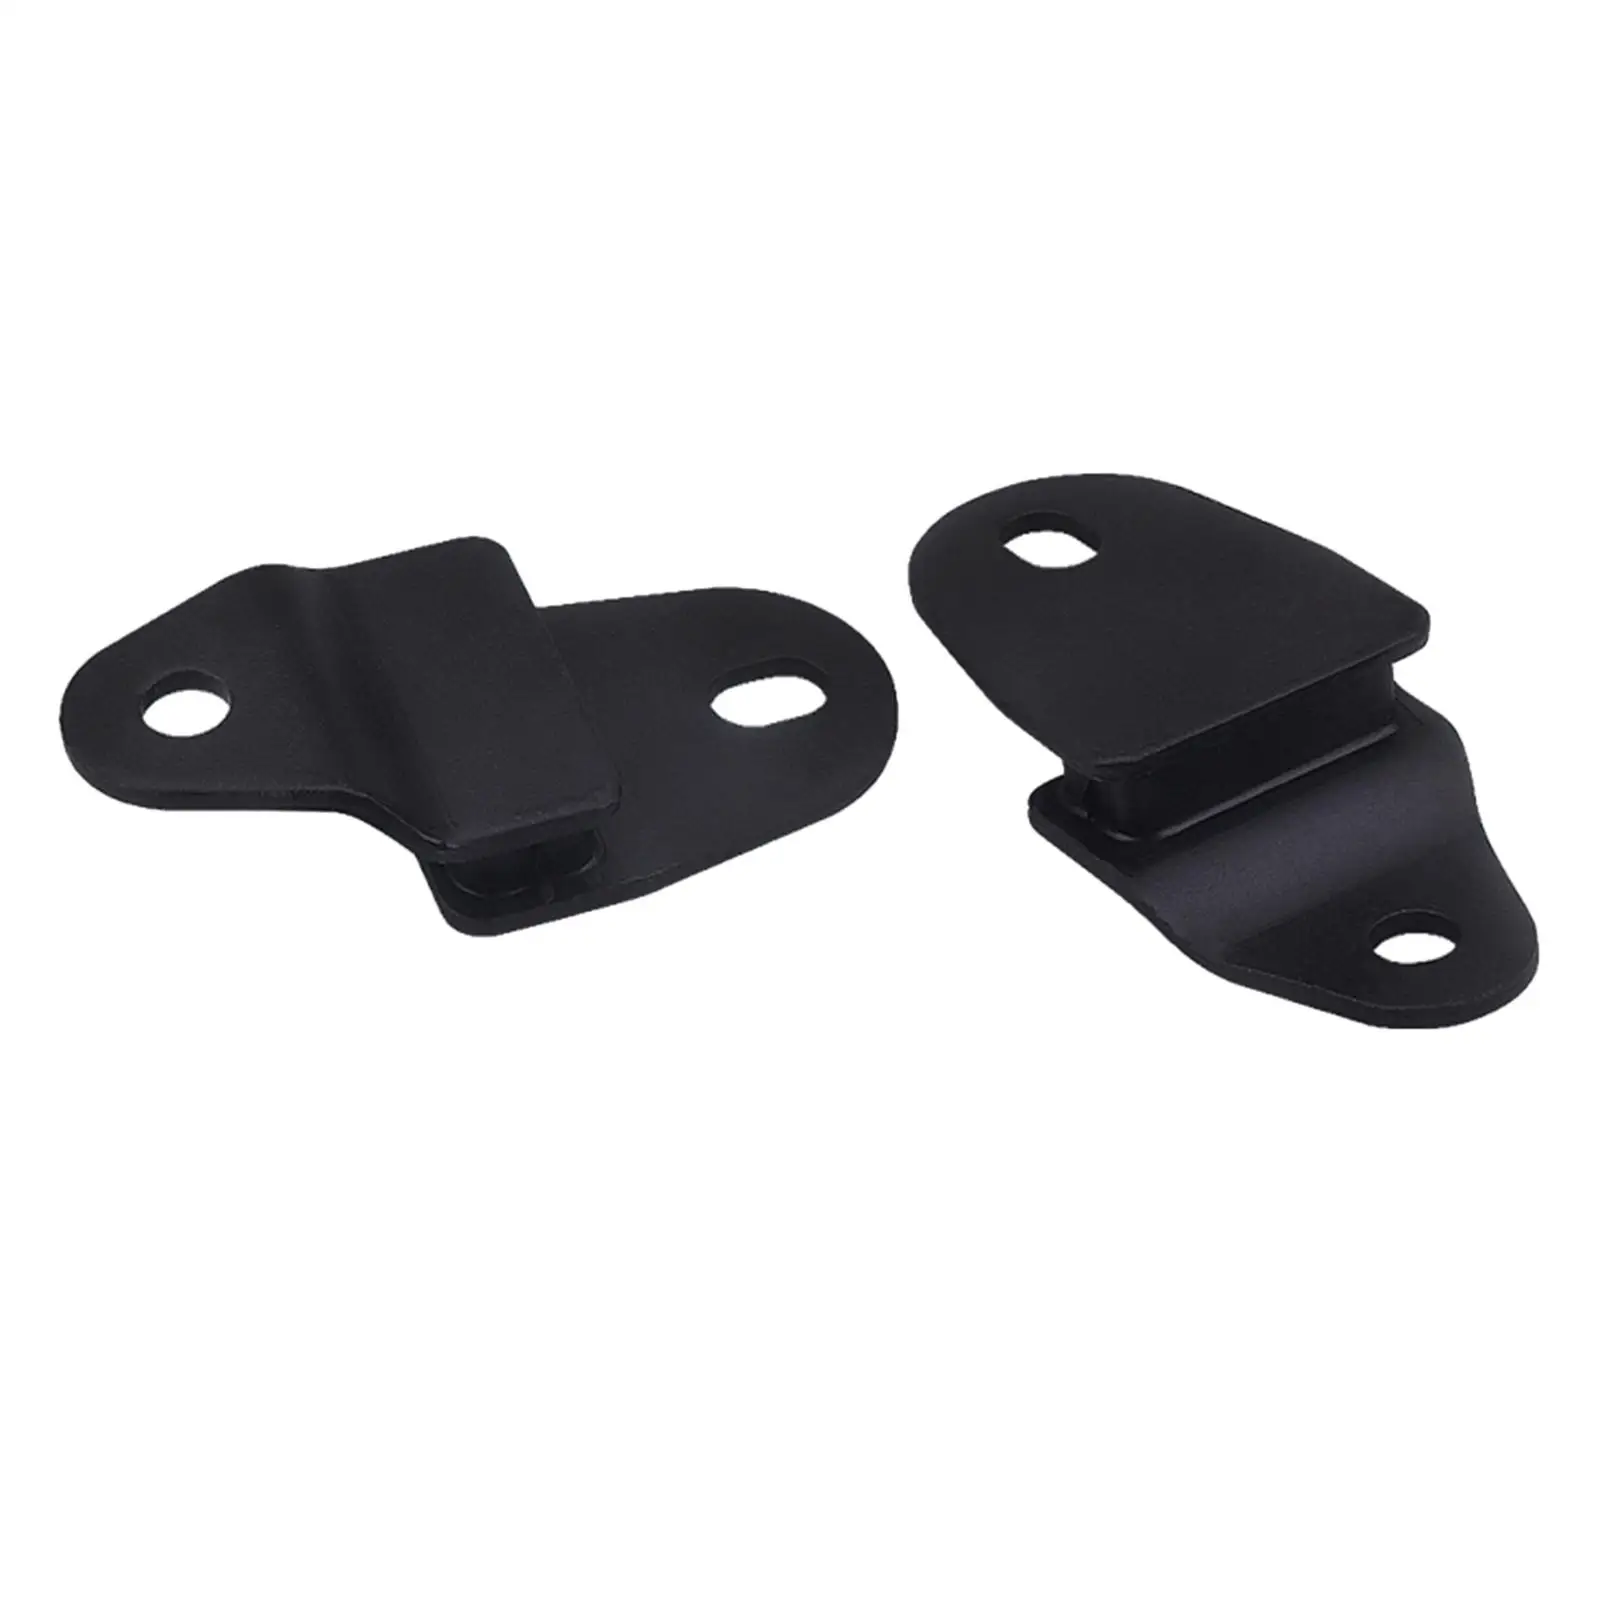 Exhaust   Bracket Hanger Stay Mounts Fits for  Banshee 350 YFZ350 1987-2006,  the product fits for your before placing order